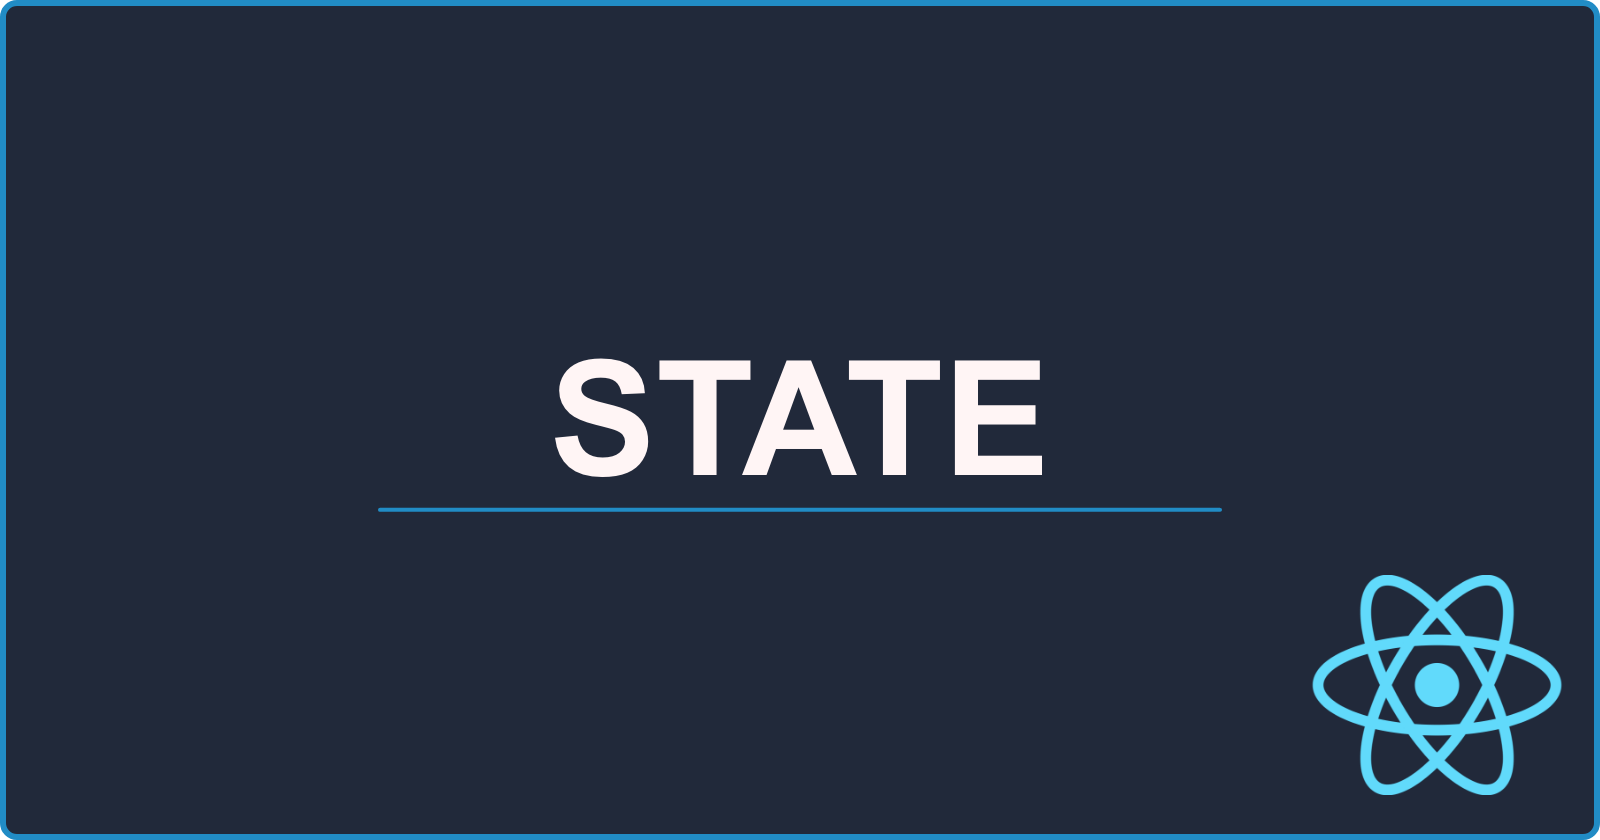 What is state in React?